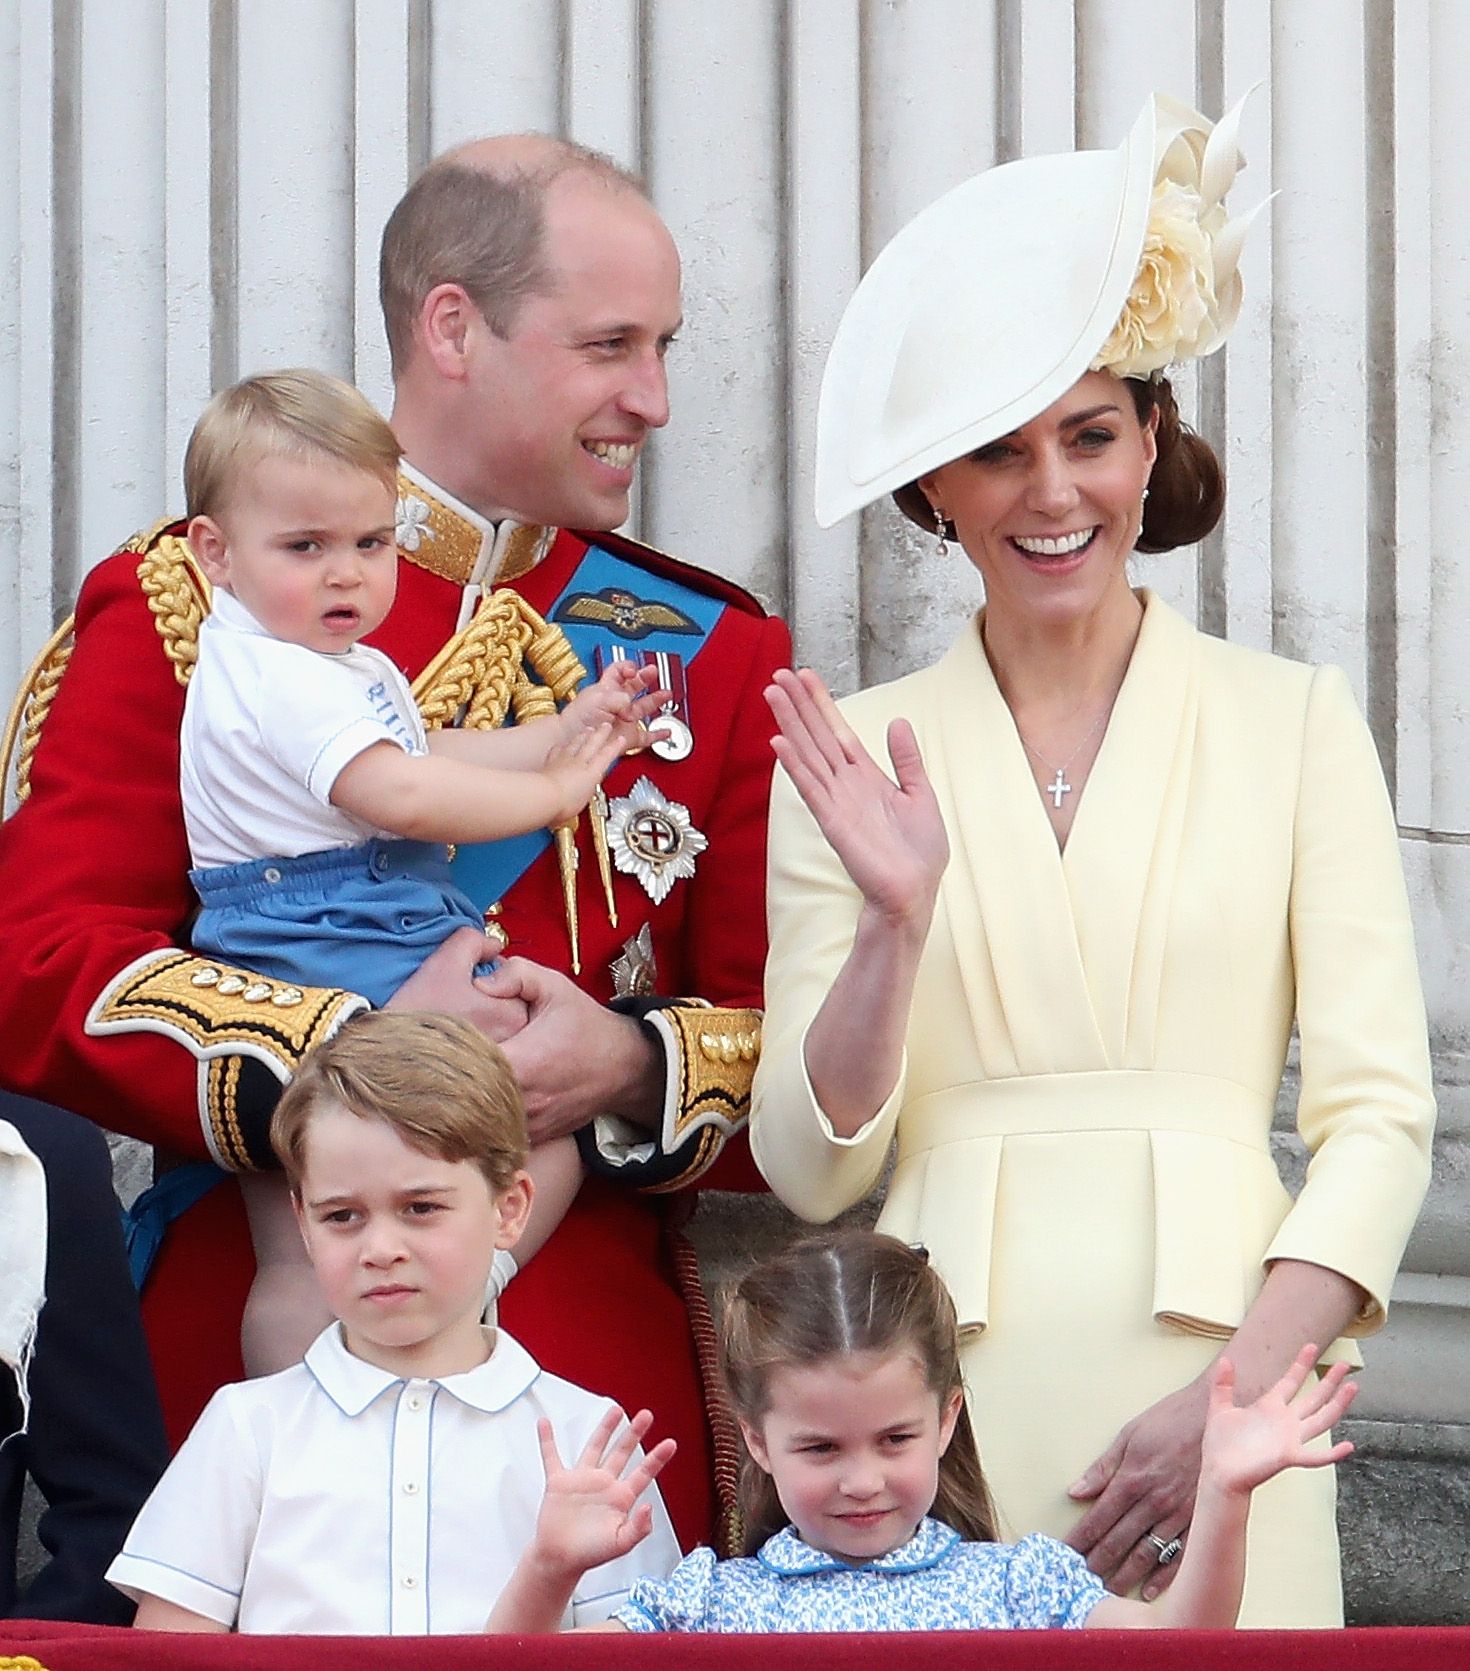 Prince William, Kate Middleton, Prince Louis, Prince George, and Princess Charlotte during Trooping The Colour on June 8, 2019. | Photo: Getty Images